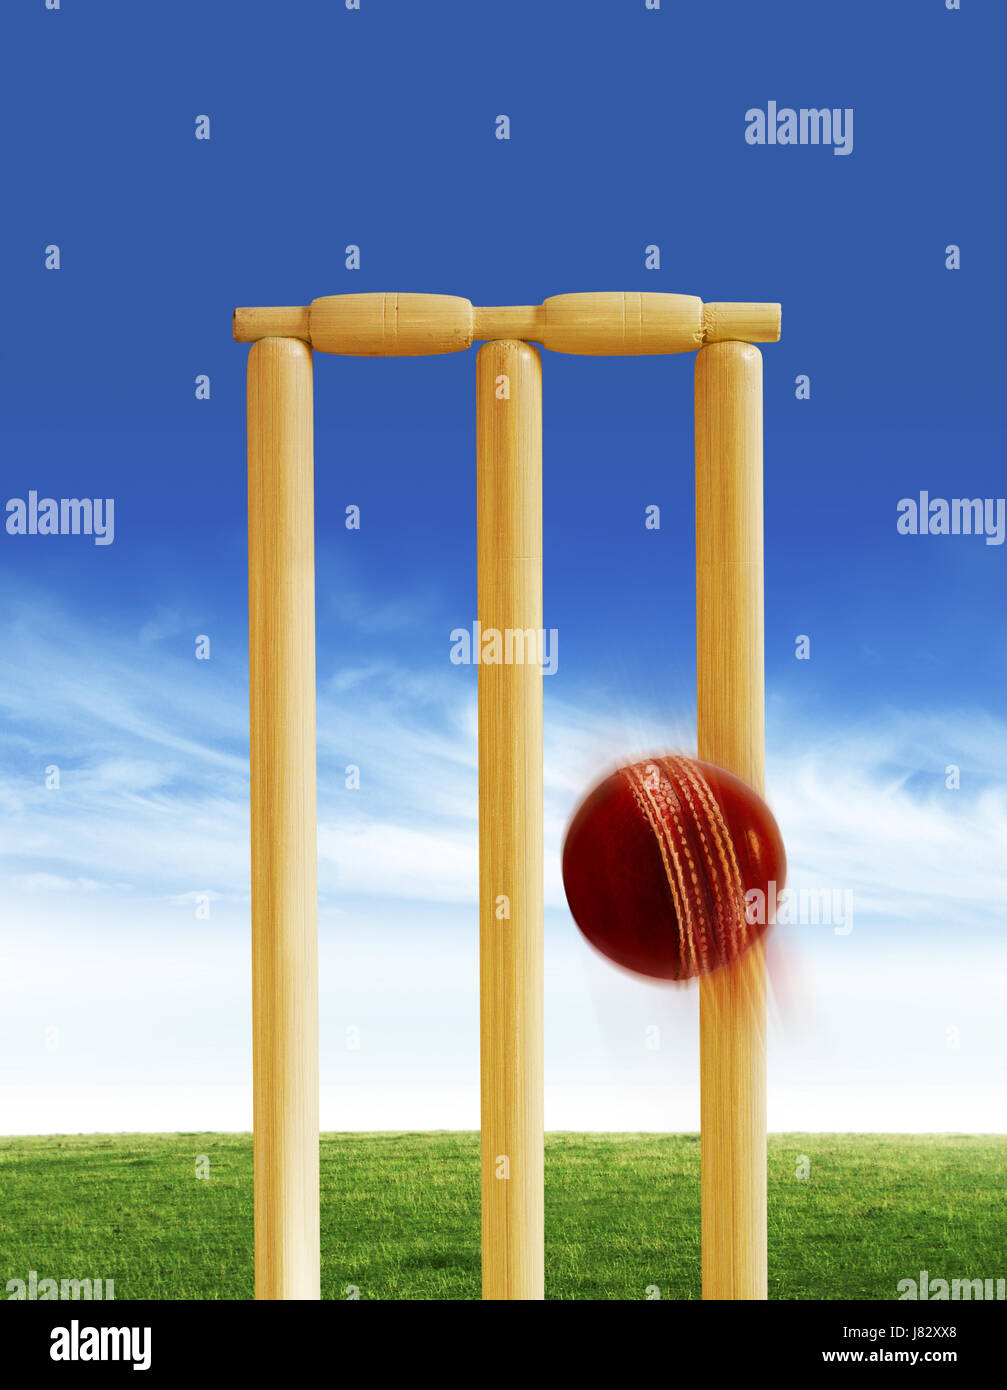 sport sports ball wickets bail cricket hit impact spare time free time leisure Stock Photo